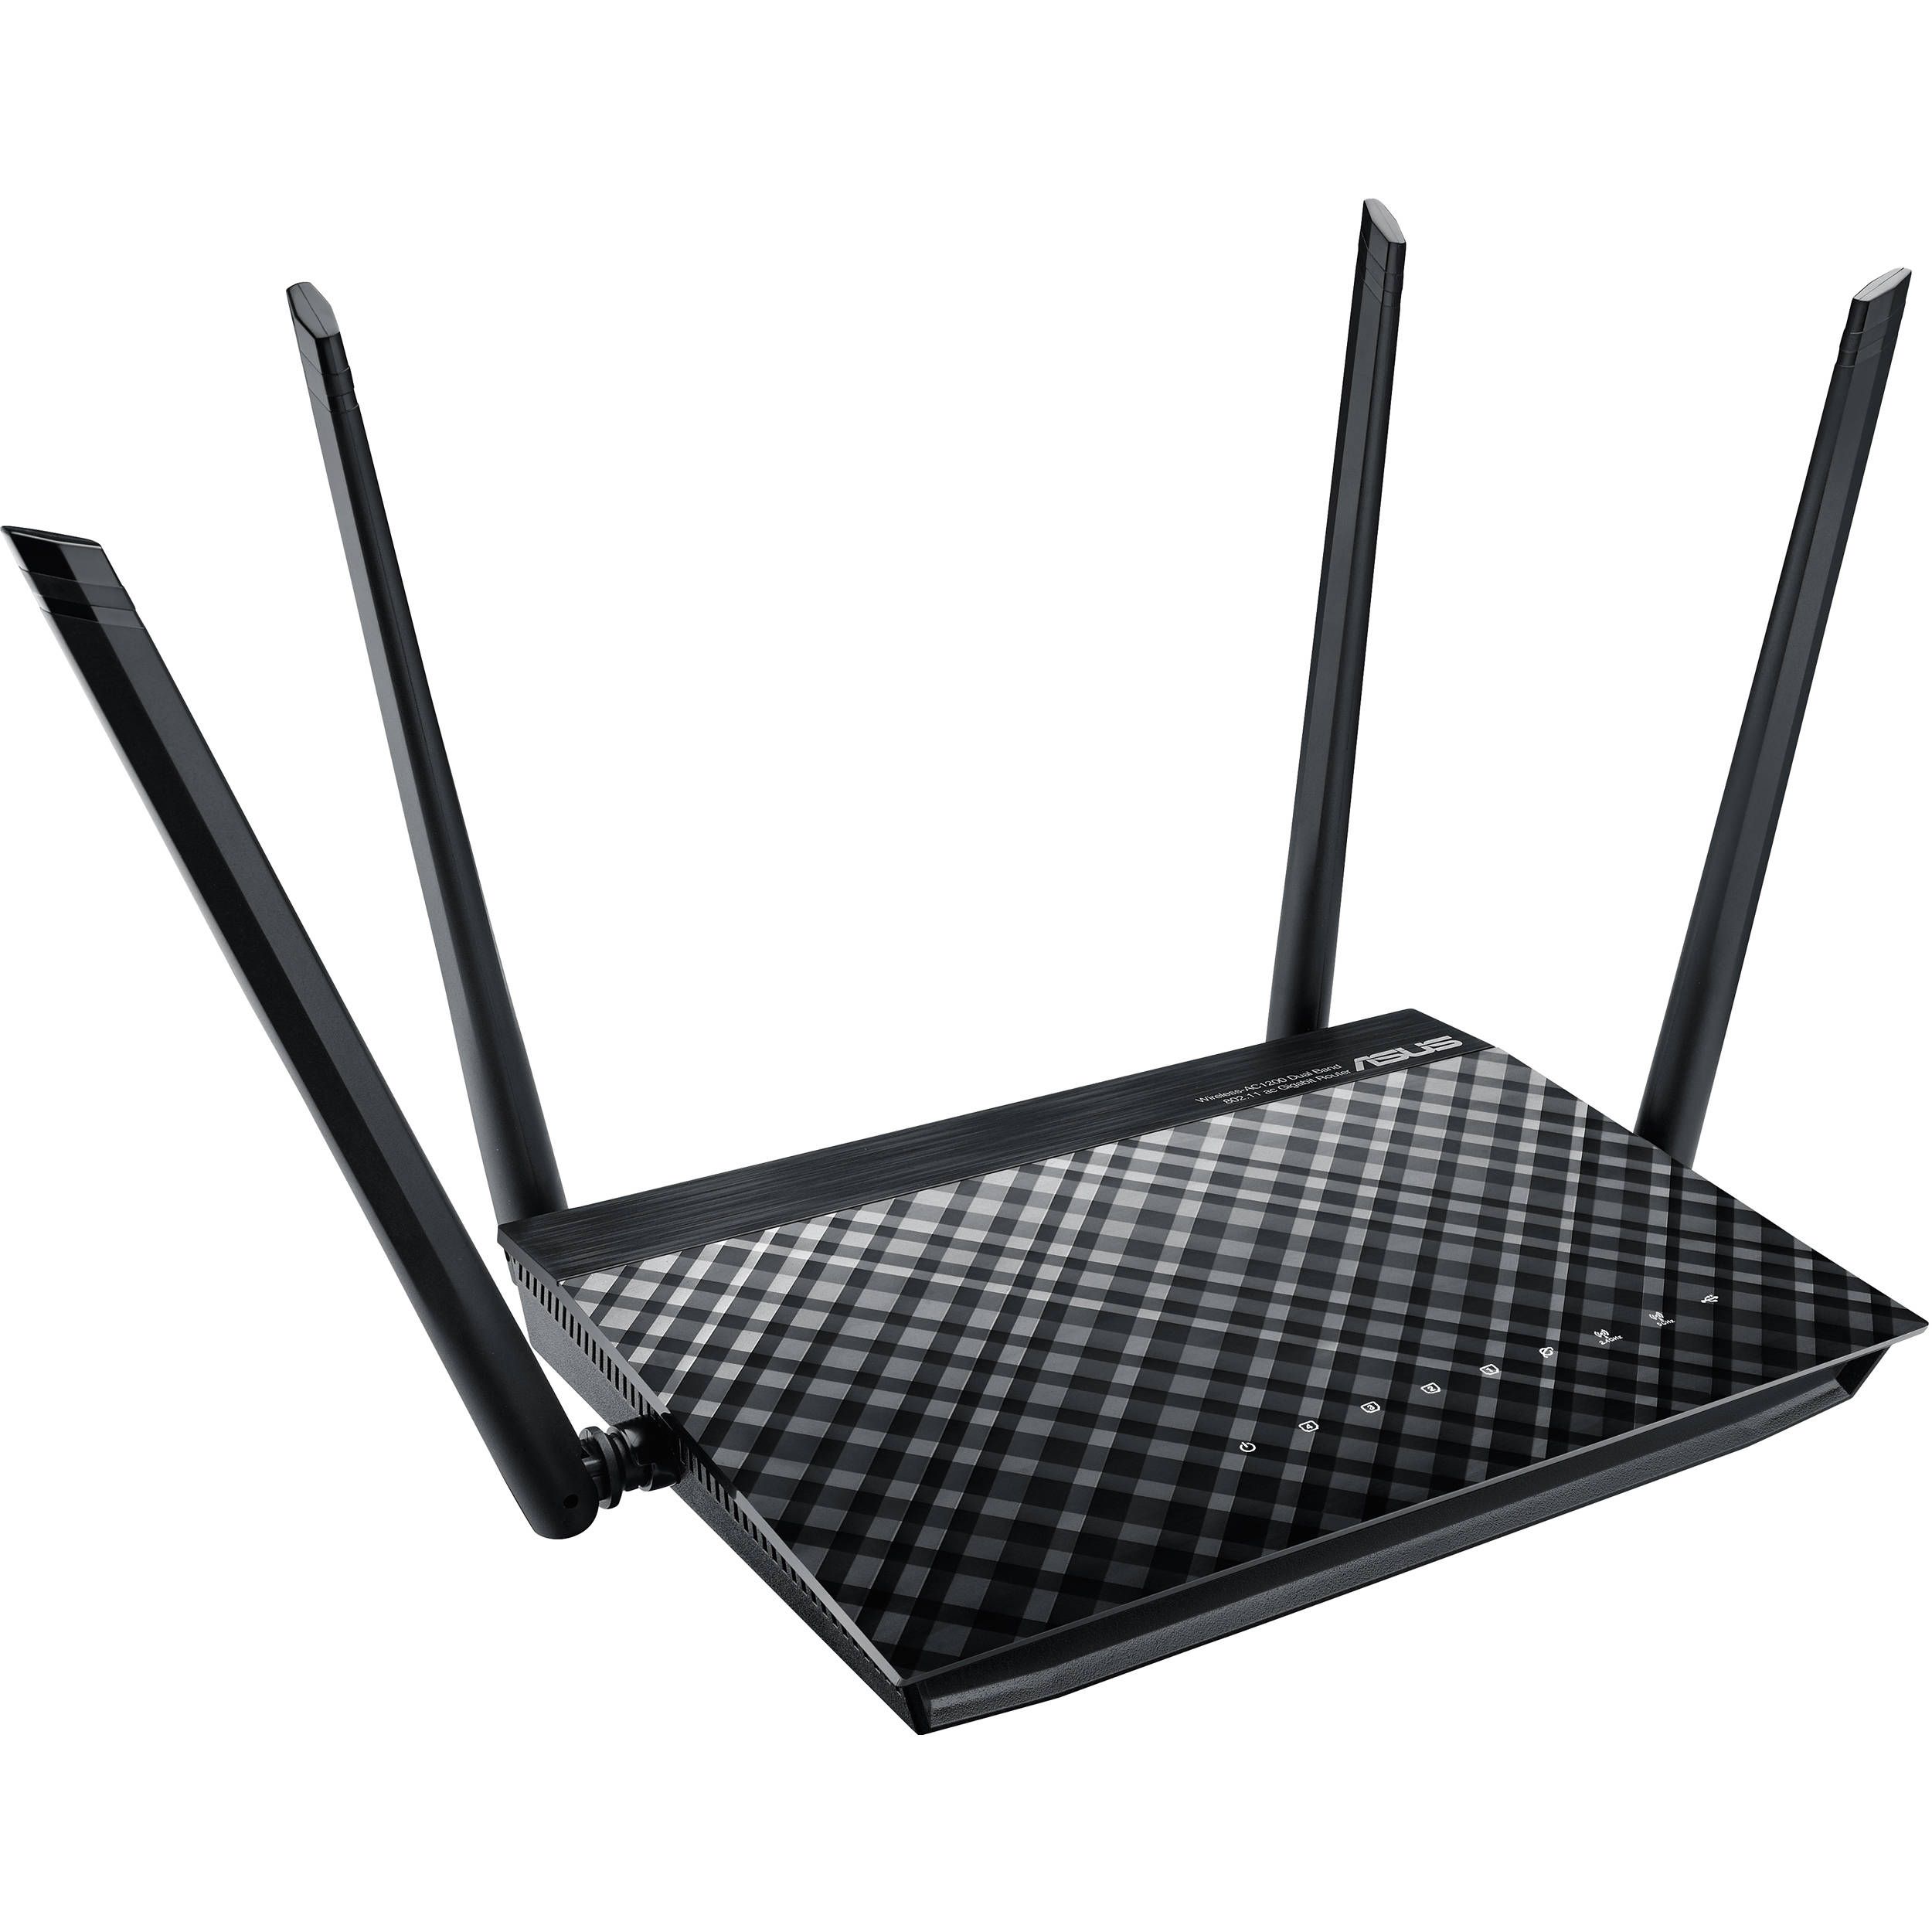 ASUS DUAL-BAND 2x2 AC1200 V2 WIFI ROUTER, Standard IEEE 802.11a, IEEE 802.11b, IEEE 802.11g, IEEE 802.11n, IEEE 802.11ac, IEEE 802.11e, IEEE 802.11i, IPv4, IPv6, External antenna x 4, Tehnologie MIMO, 2,4 GHz 2 x 2, 5 GHz 2 x 2, Memorie:16 MB Flash, 64 MB RAM, RJ45 for 10/100Mbps BaseT for WAN x 1_2